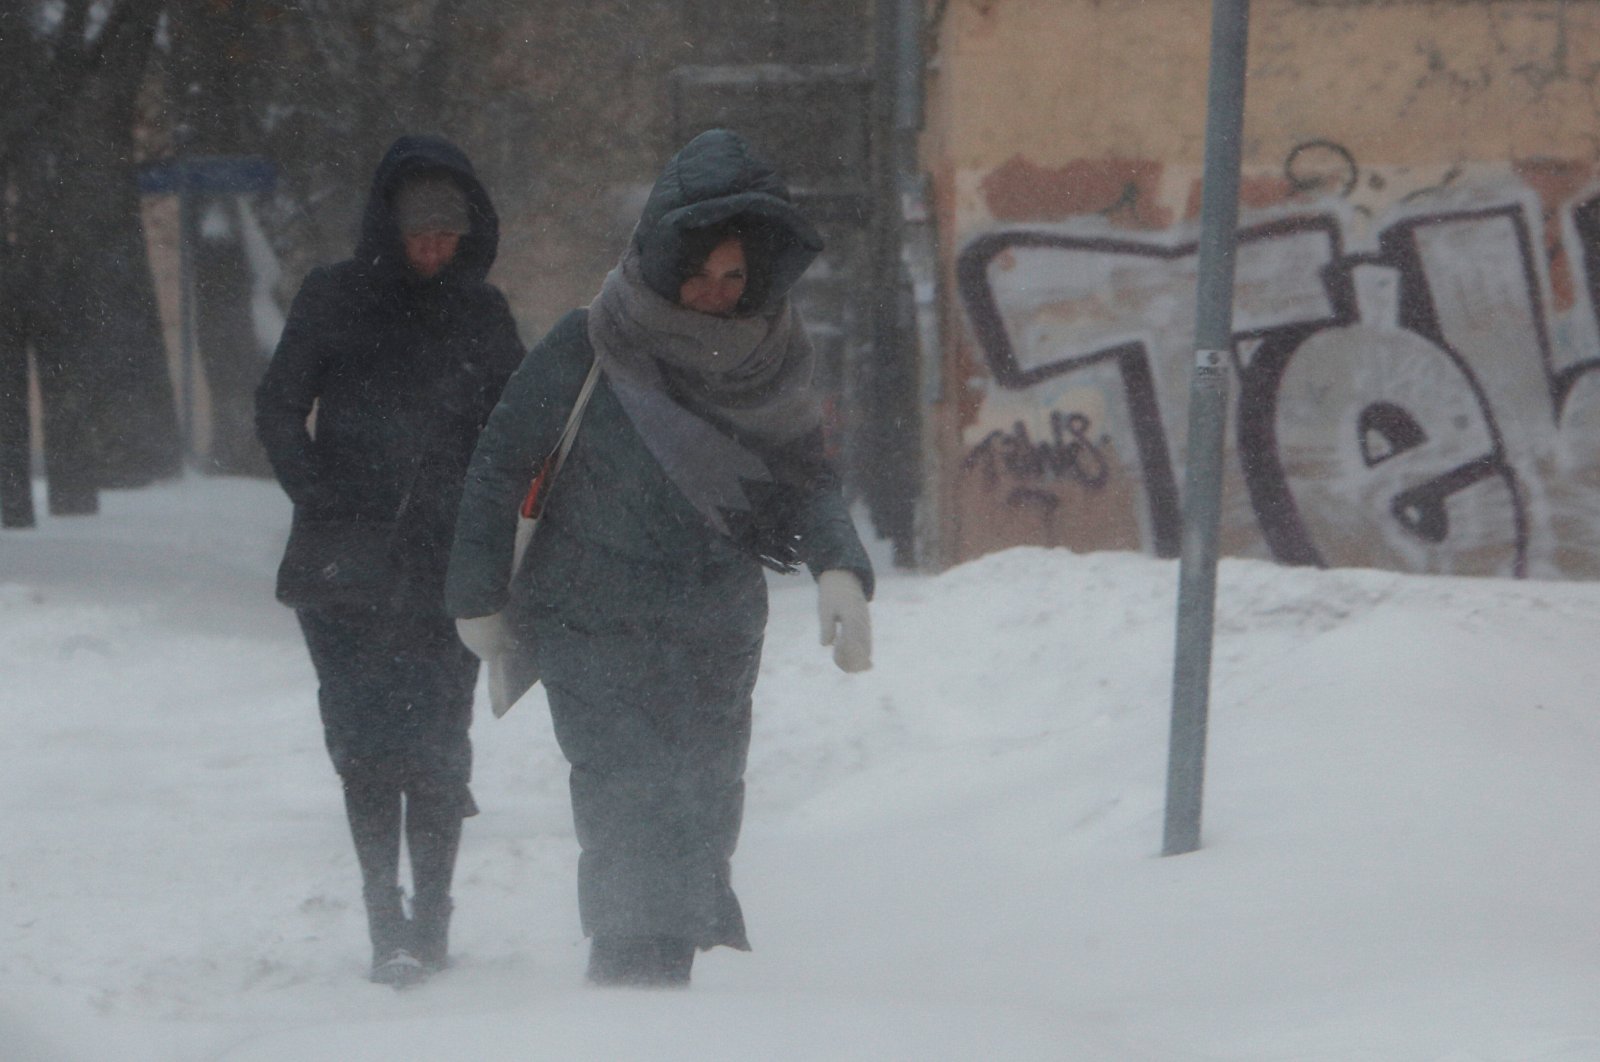 People walk along a street during heavy snowfall in Moscow, Russia on Feb. 12, 2021. (Reuters Photo)